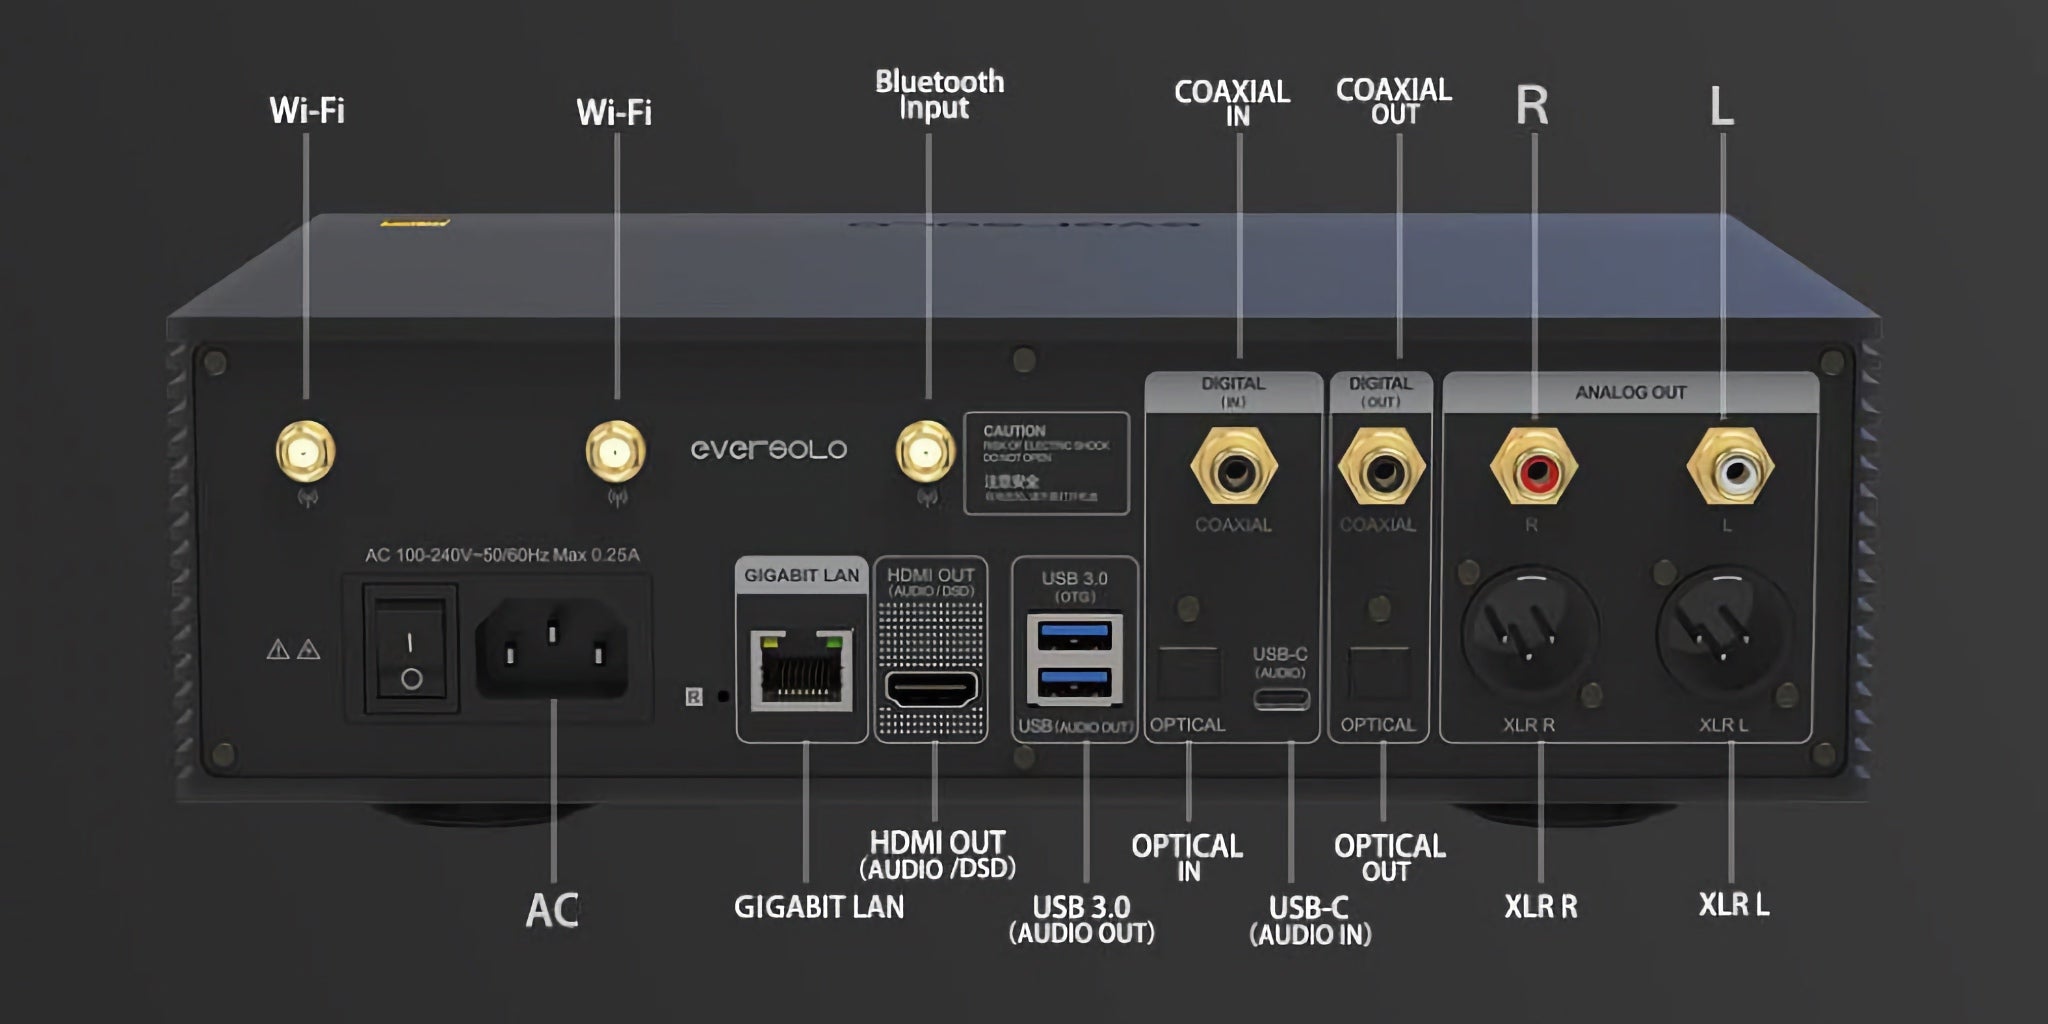 EverSolo DMP-A6  rear input and output diagram